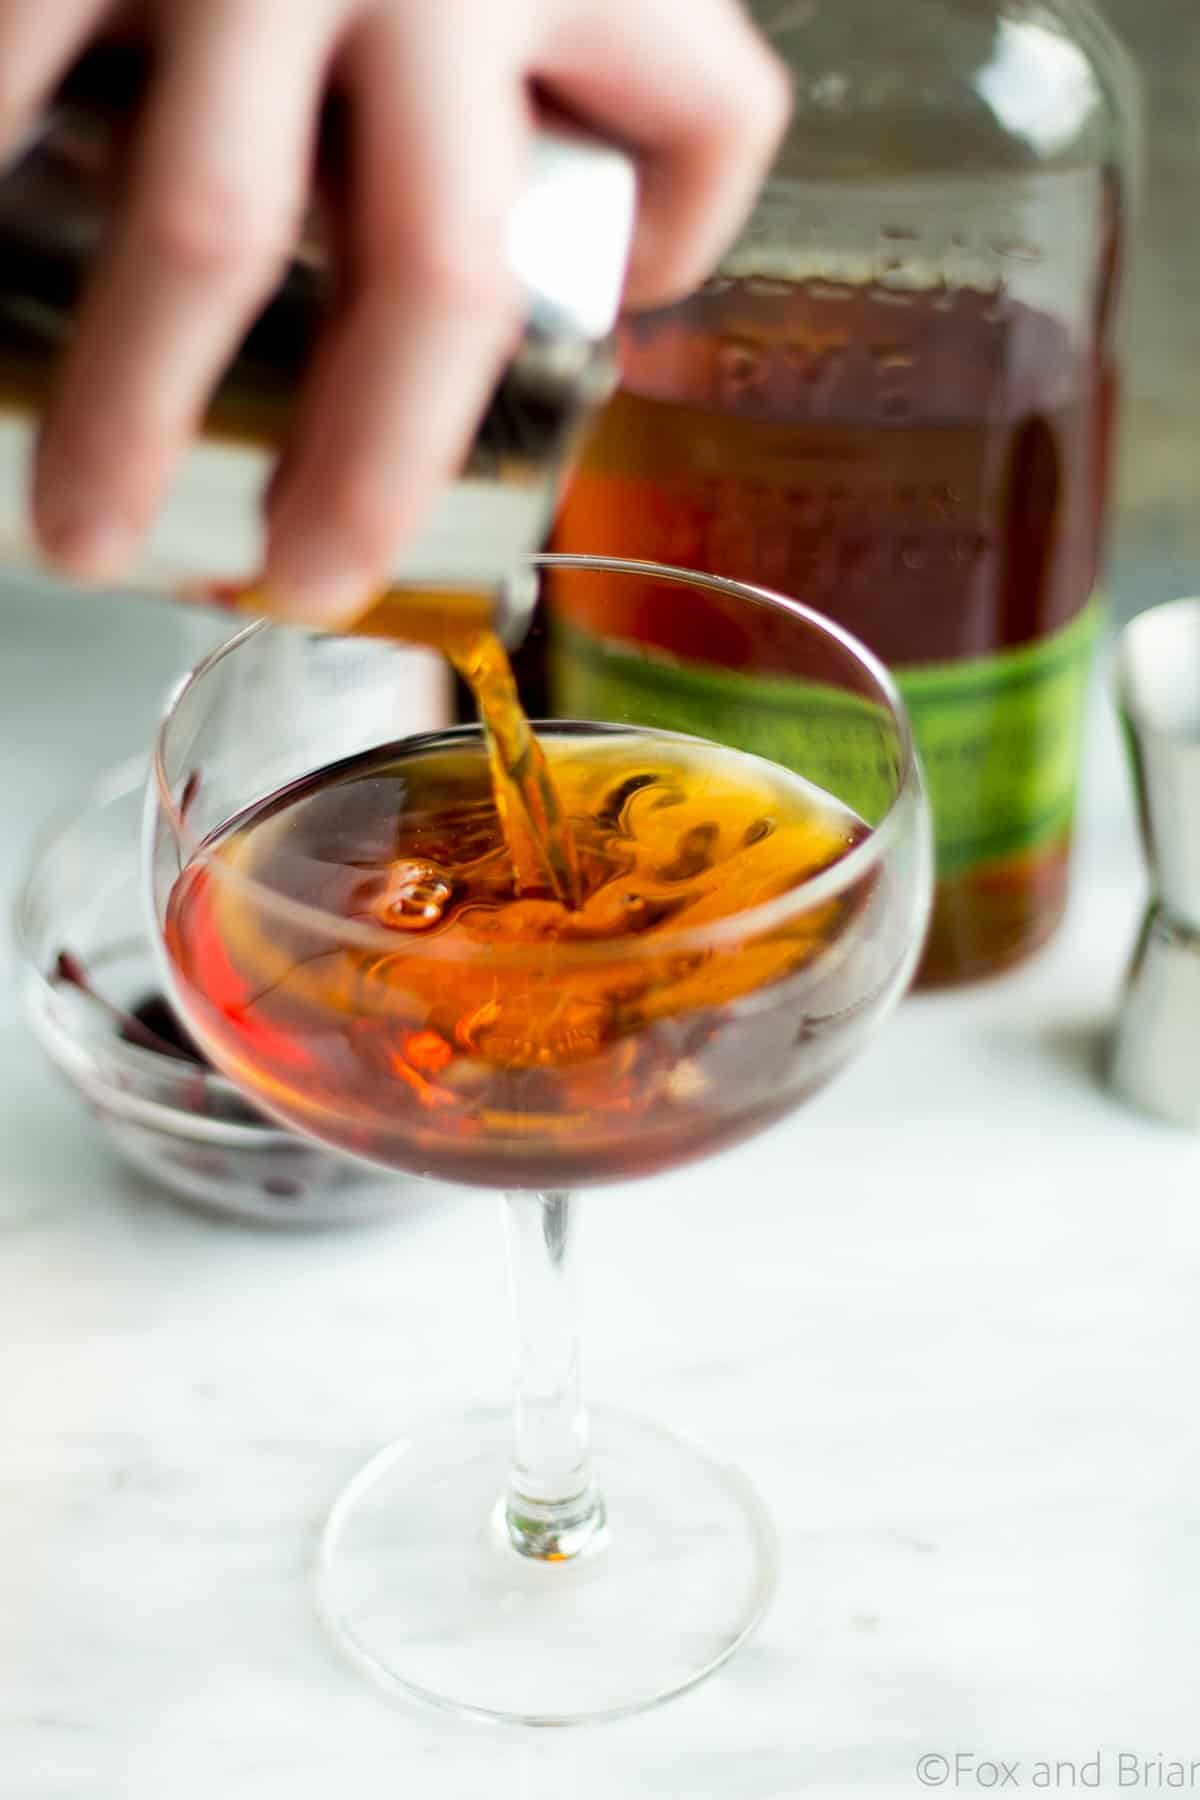 This classic Manhattan cocktail is classic for a reason! Rye whiskey, sweet vermouth plus a secret ingredient that gives a little twist on the original!